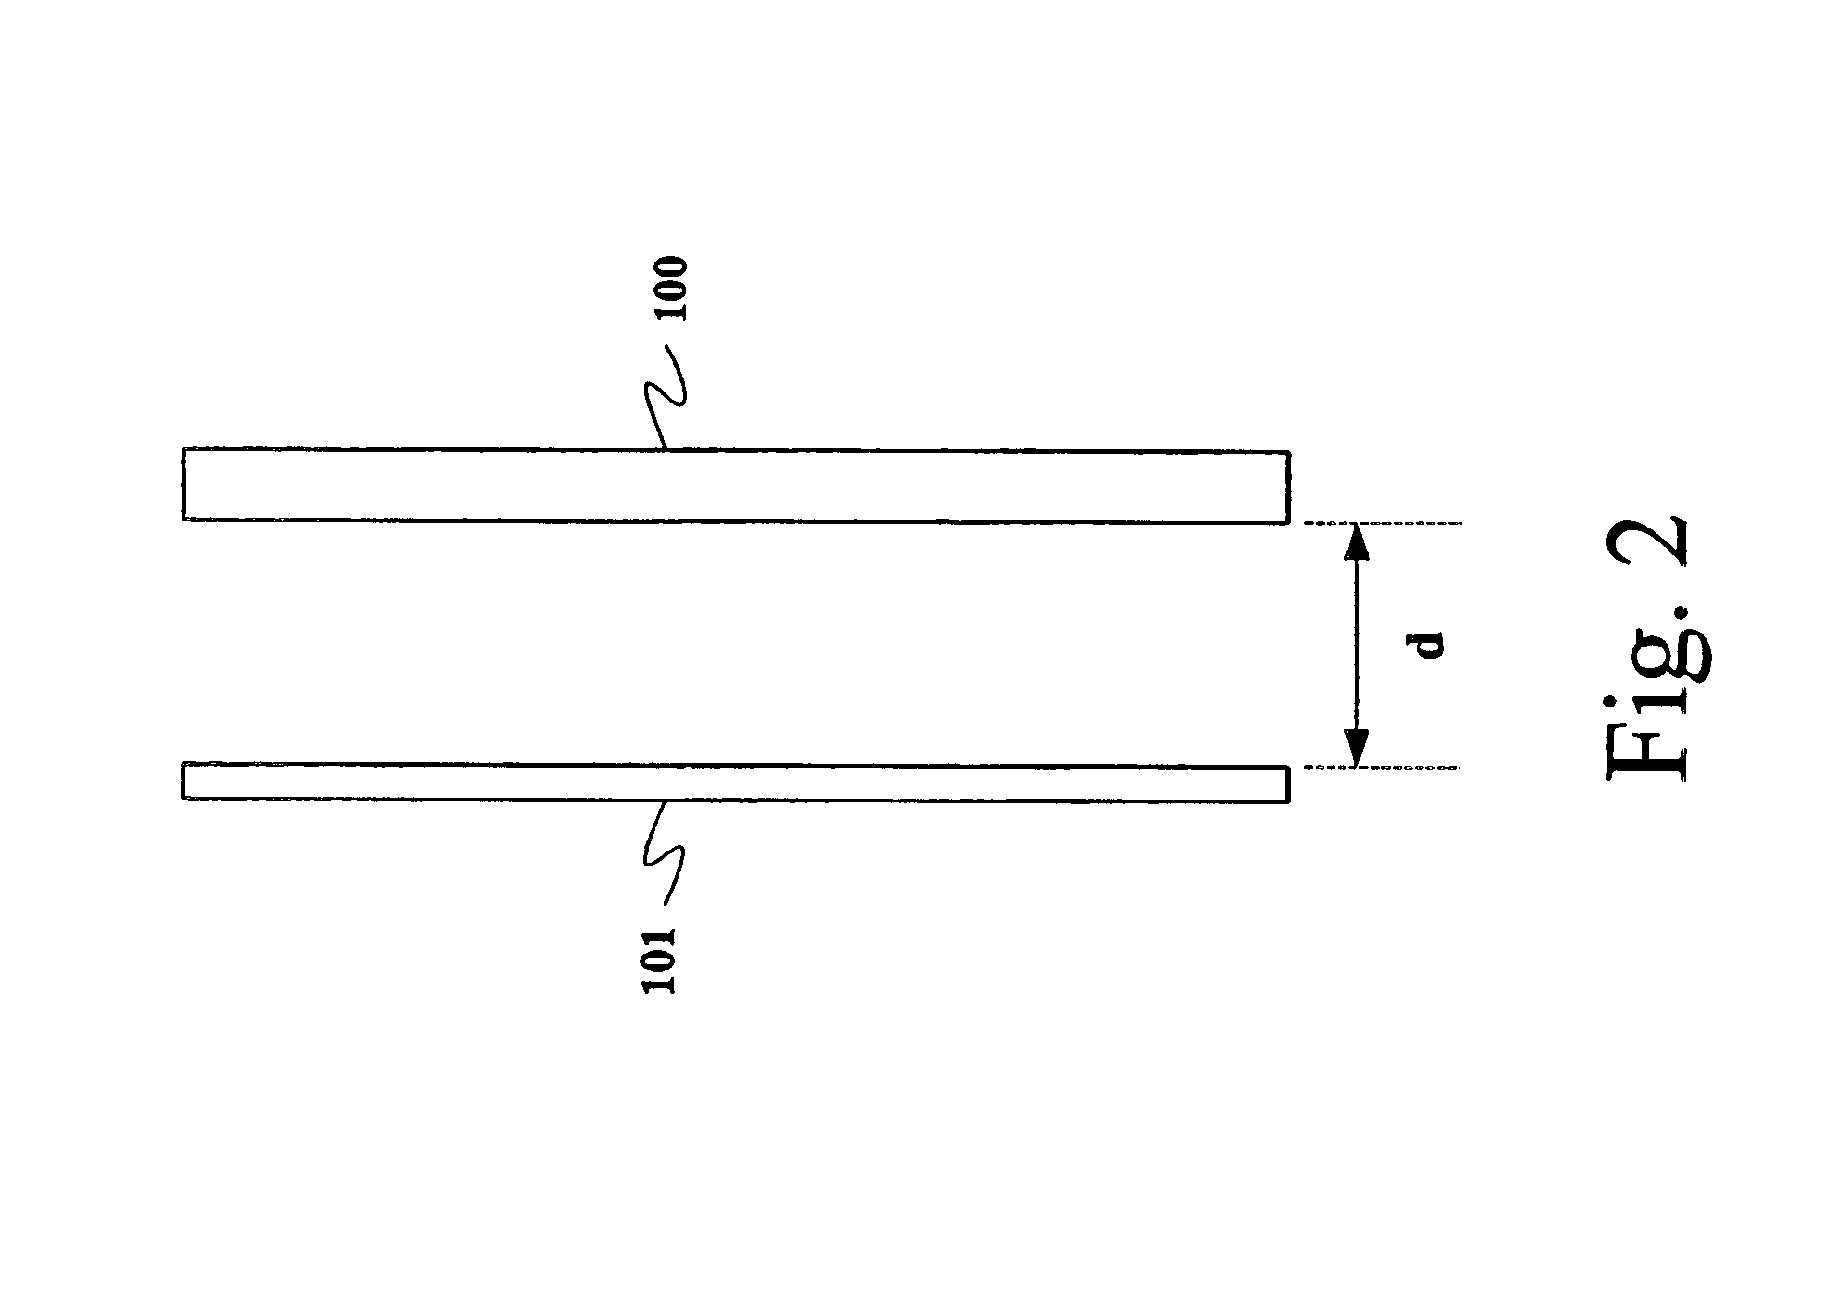 Electrically small planar UWB antenna apparatus and related system